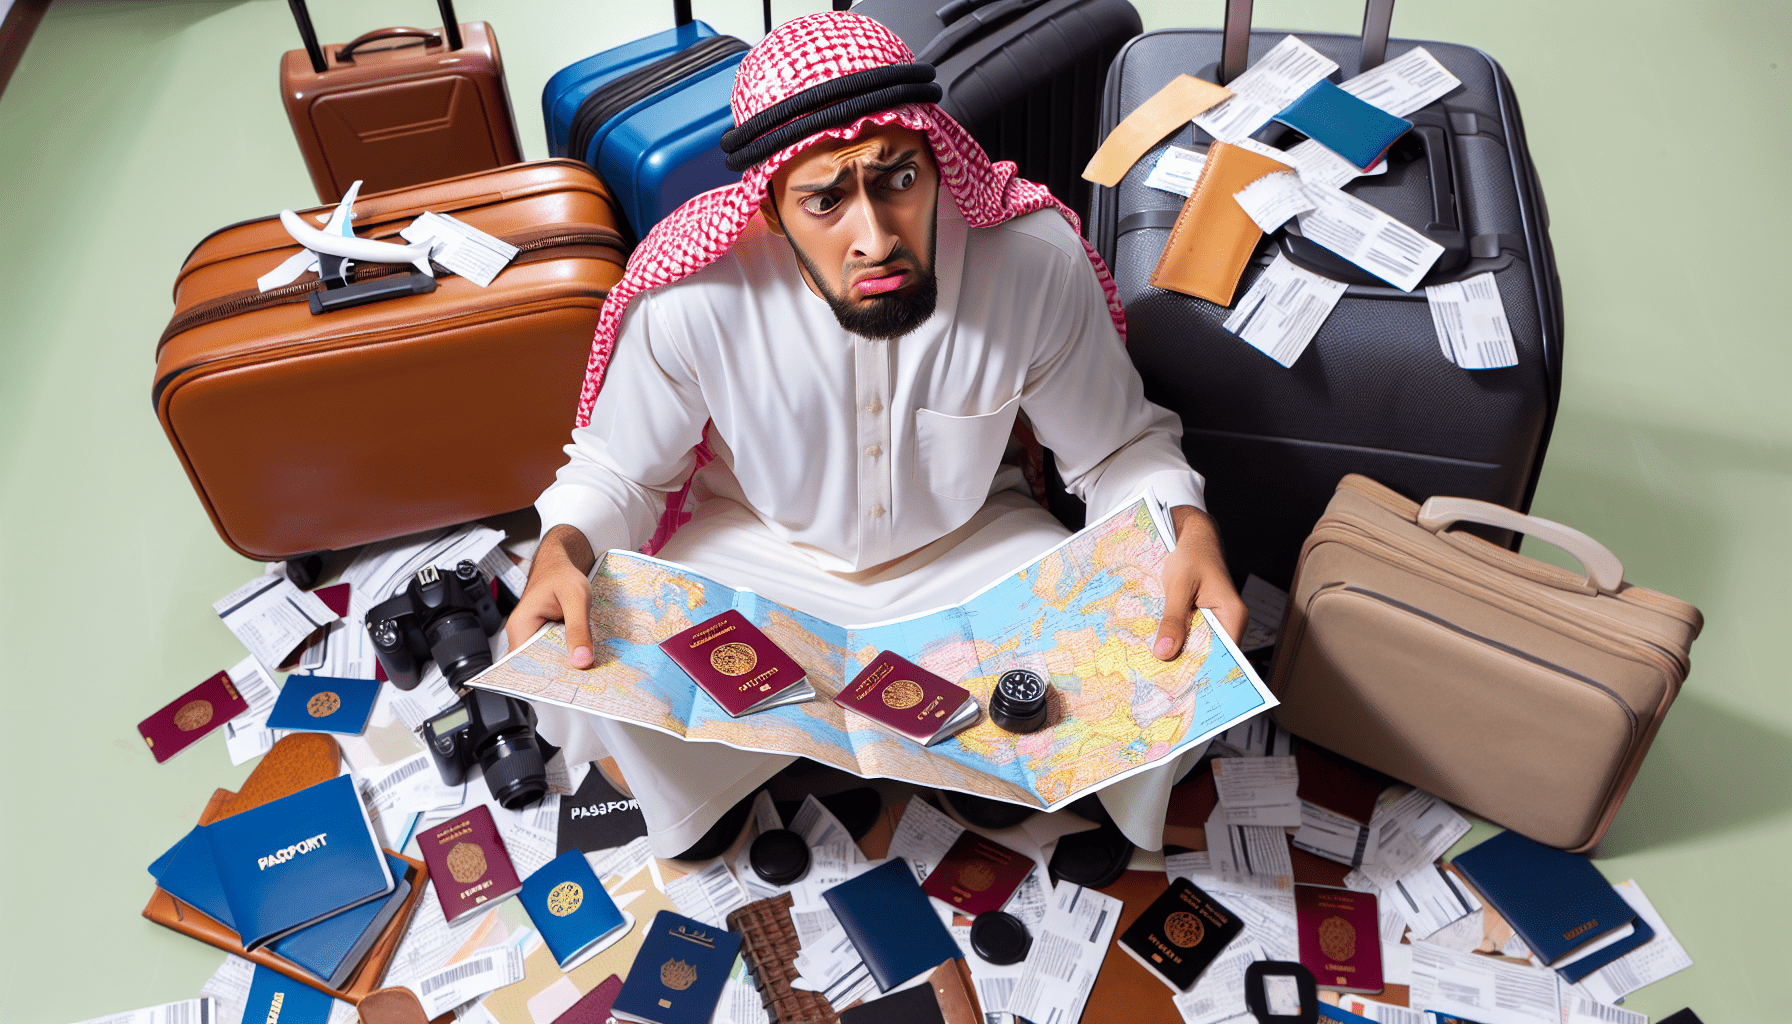 17 Common Travel Mistakes and How to Avoid Them